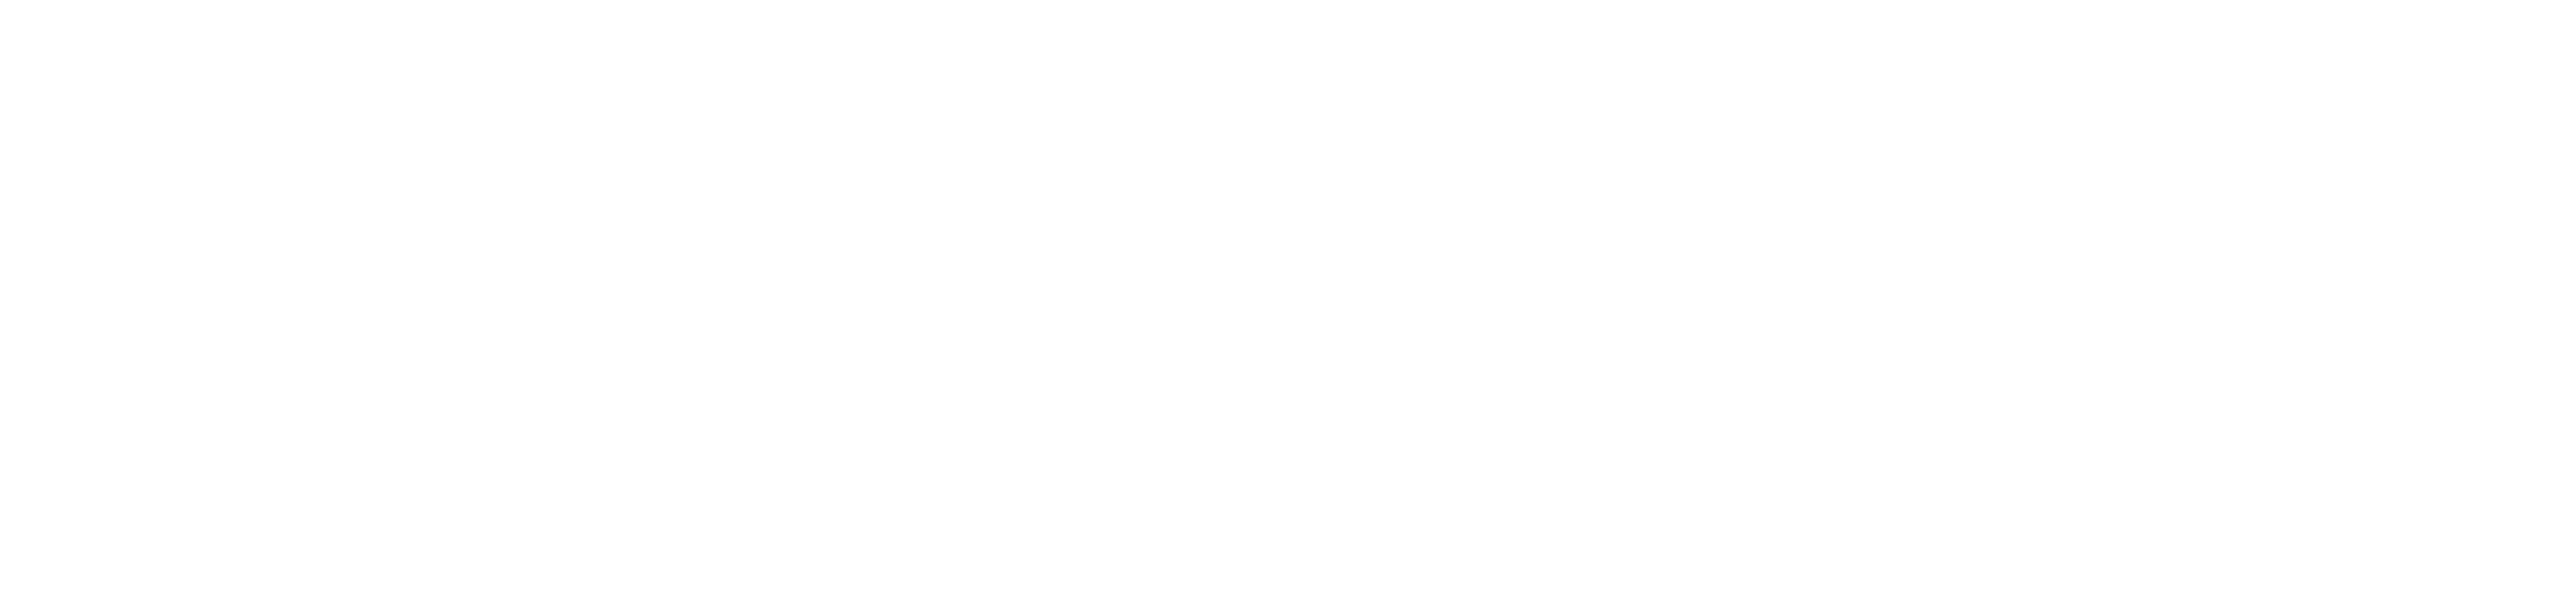 New England Pension Plan Systems